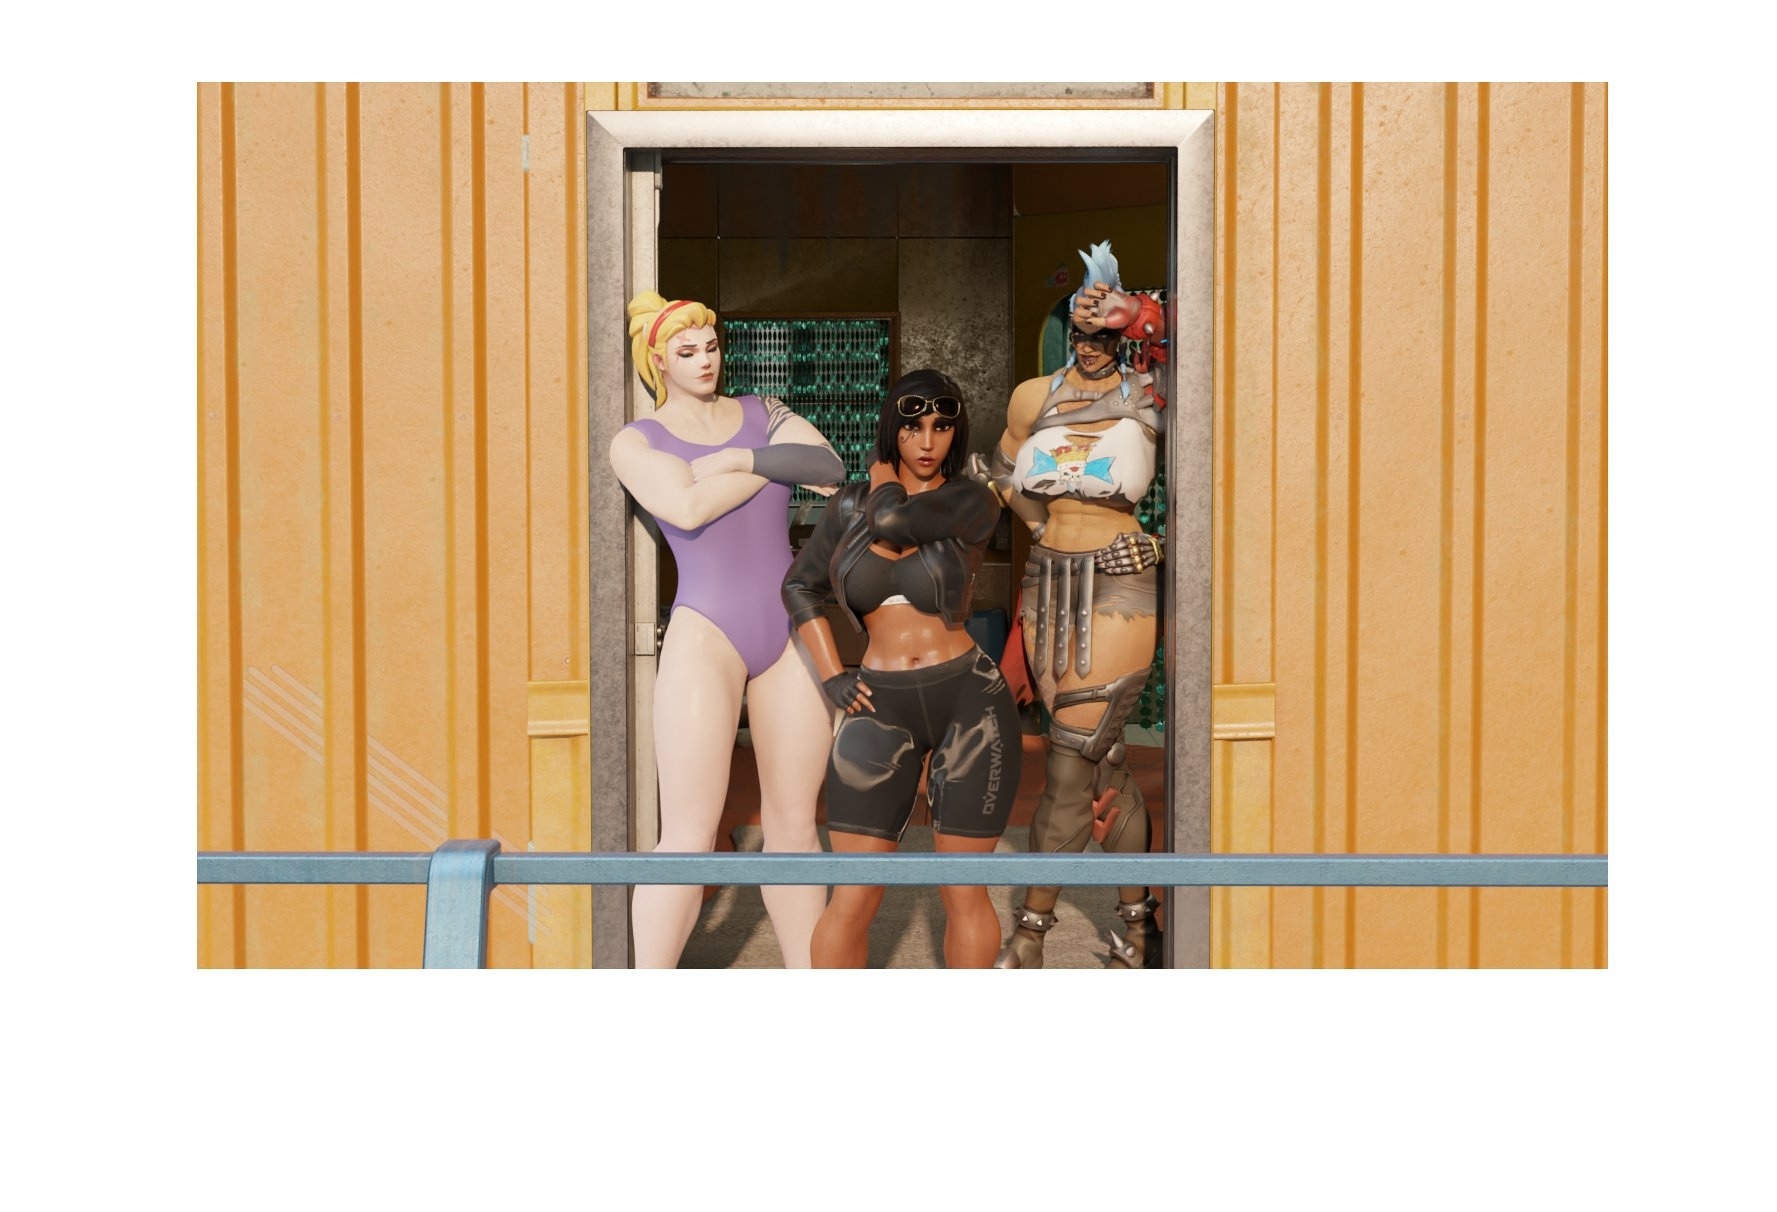 Looks like someone s lost  Pharah Zarya (overwatch) Junkerqueen Overwatch Boobs Big boobs Lingerie Big Tits Cake Ass Big Ass Sexy Horny Face Horny 3d Porn